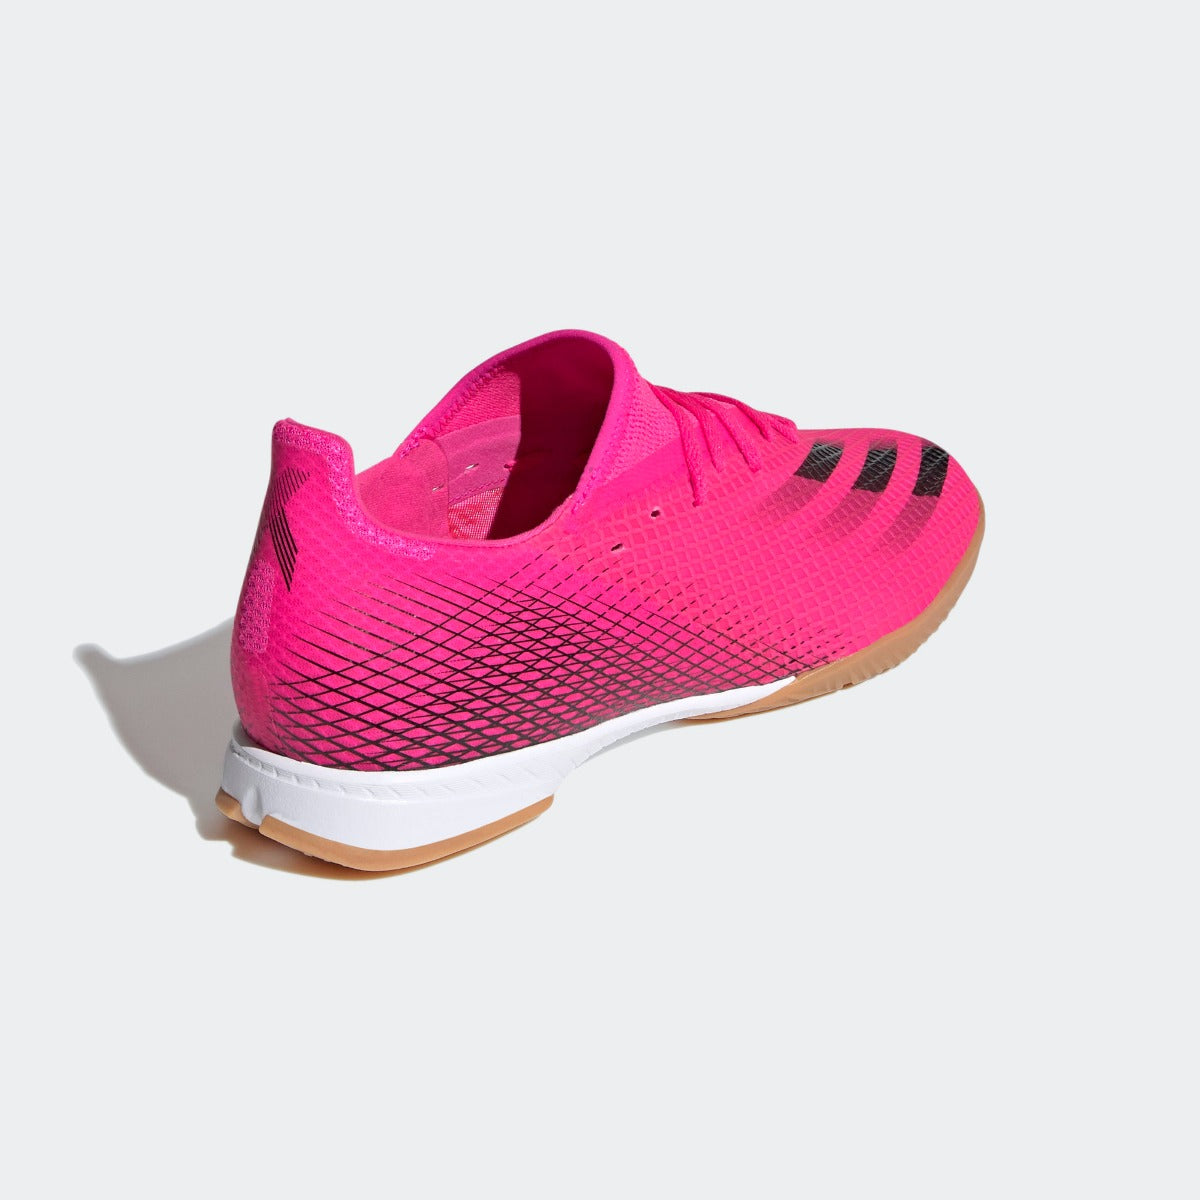 Adidas X Ghosted .3 IN - Pink-Black (Diagonal 2)